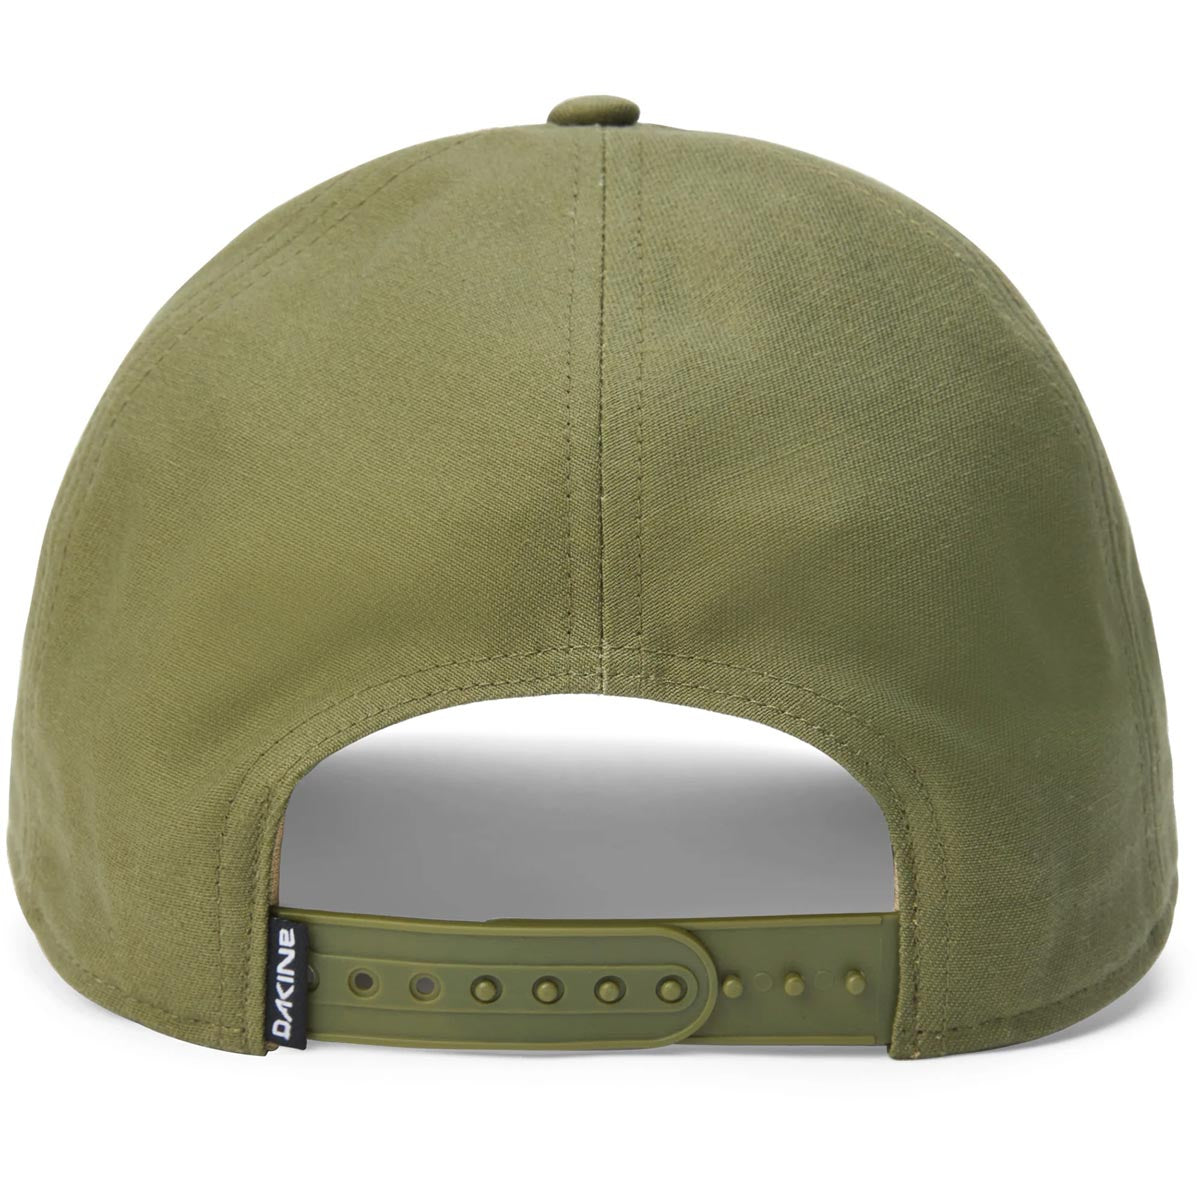 Dakine All Sports Patch Ball Hat - Dusky Green image 2